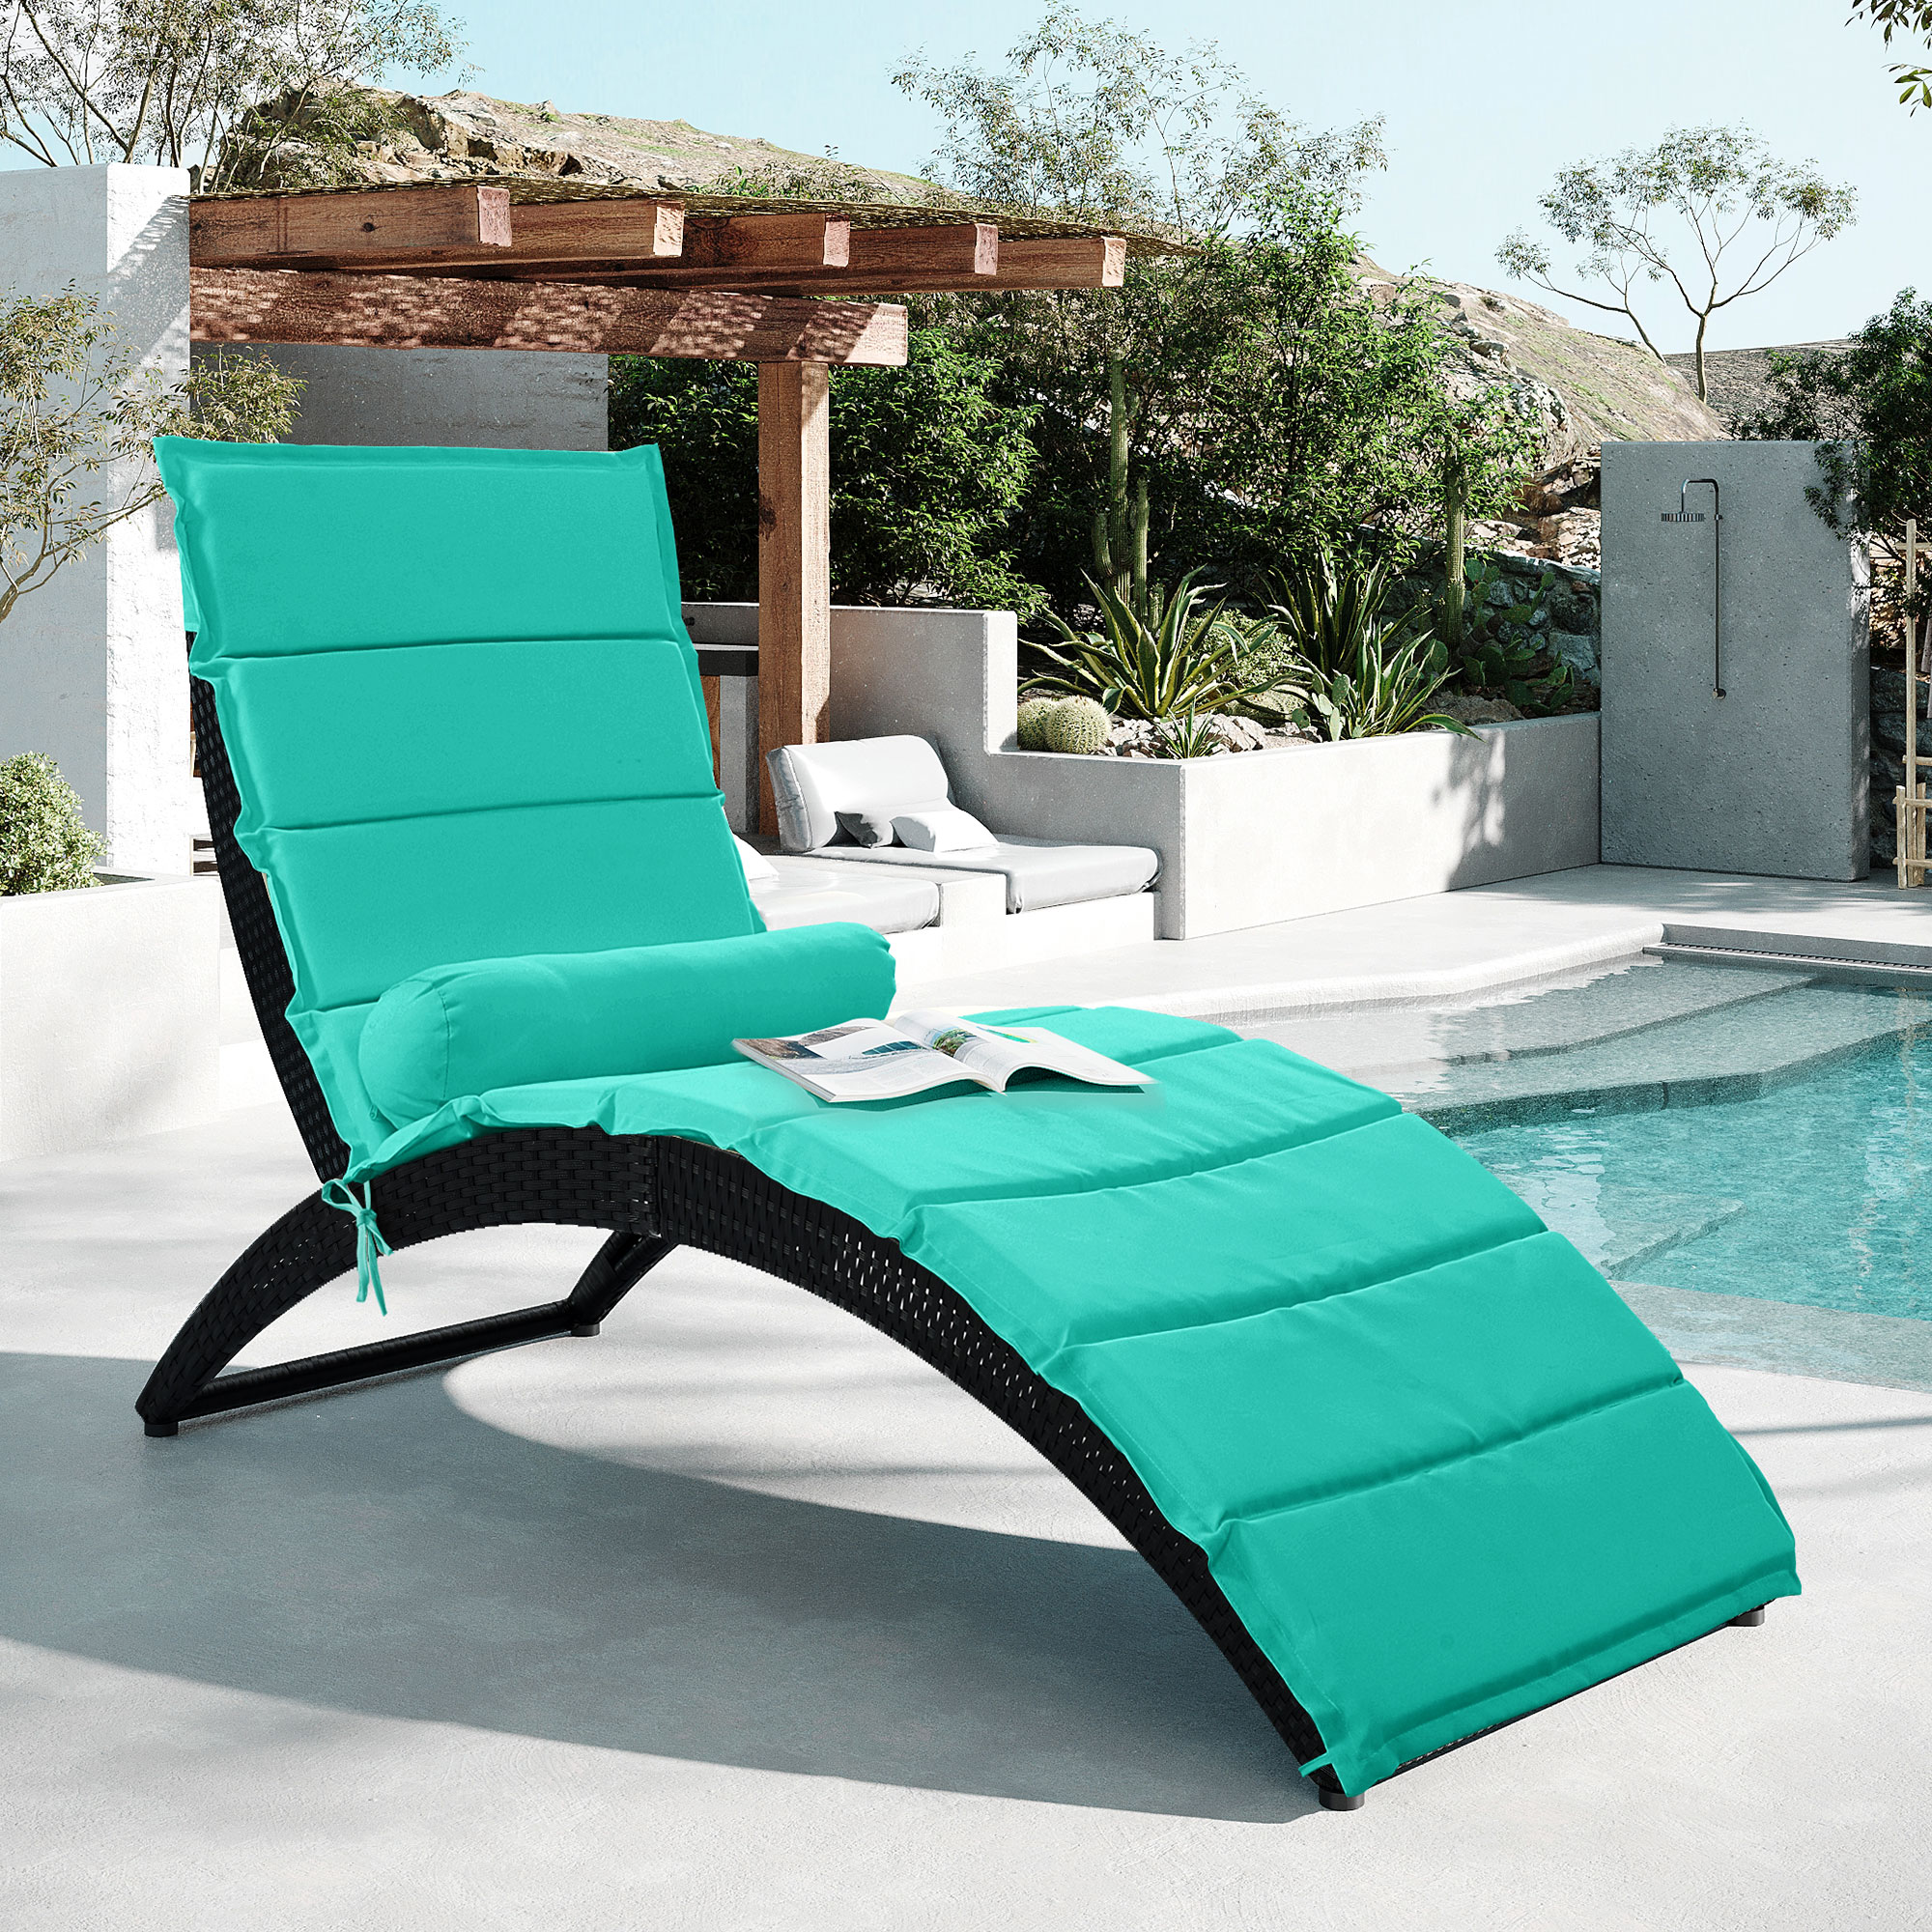 SYNGAR Patio Lounge Chair, Patio Chaise Lounges with Thickened Cushionand Bolster Pillow, PE Rattan Steel Frame Pool Lounge Chair for Patio Backyard Porch Garden Poolside, Blue - image 2 of 9